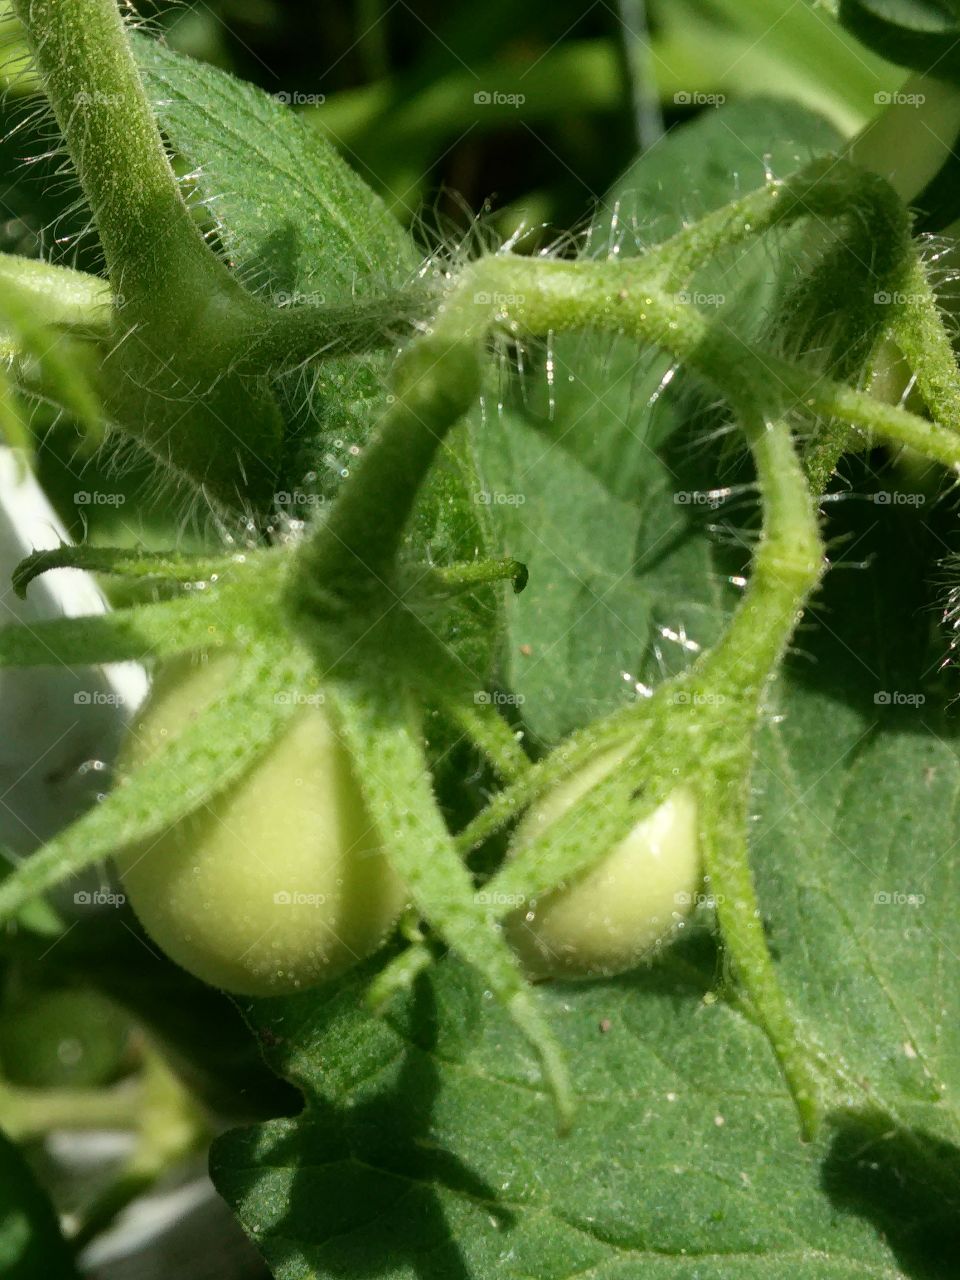 Tomatoe Plant. posted tomatoes plant from my garden